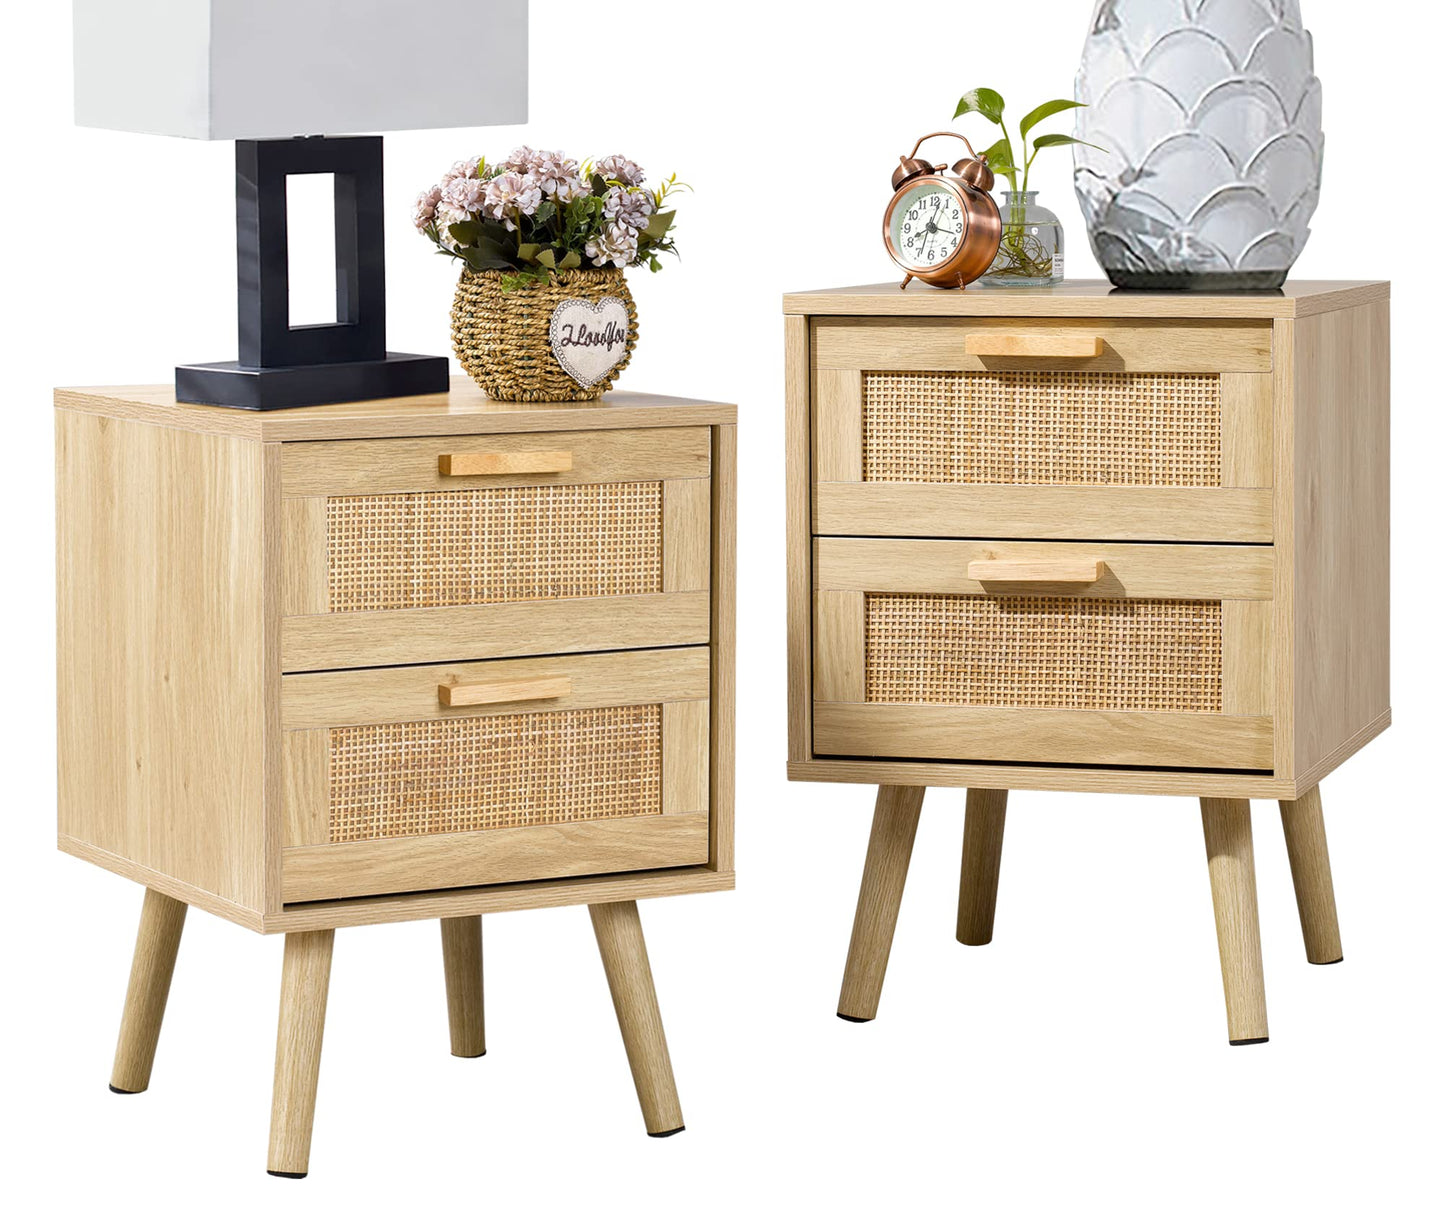 Finnhomy Nightstand, End Table, Side Table with 2 Hand Made Rattan Decorated Drawers, Nightstands Set of 2, Wood Accent Table with Storage for